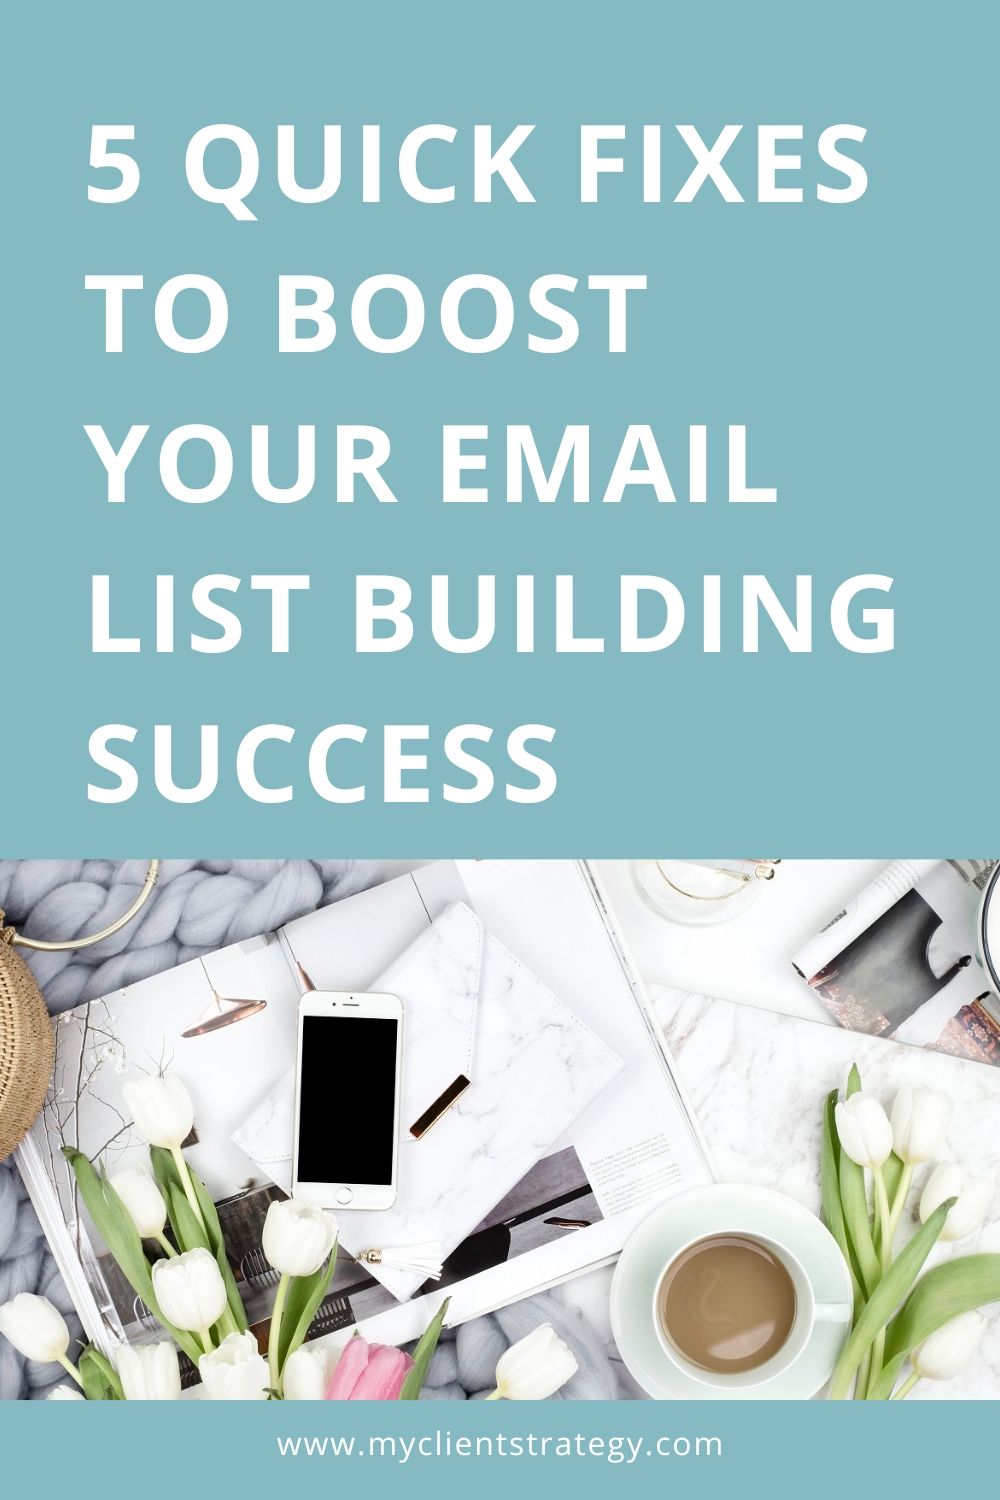 5 quick fixes to boost your list building success